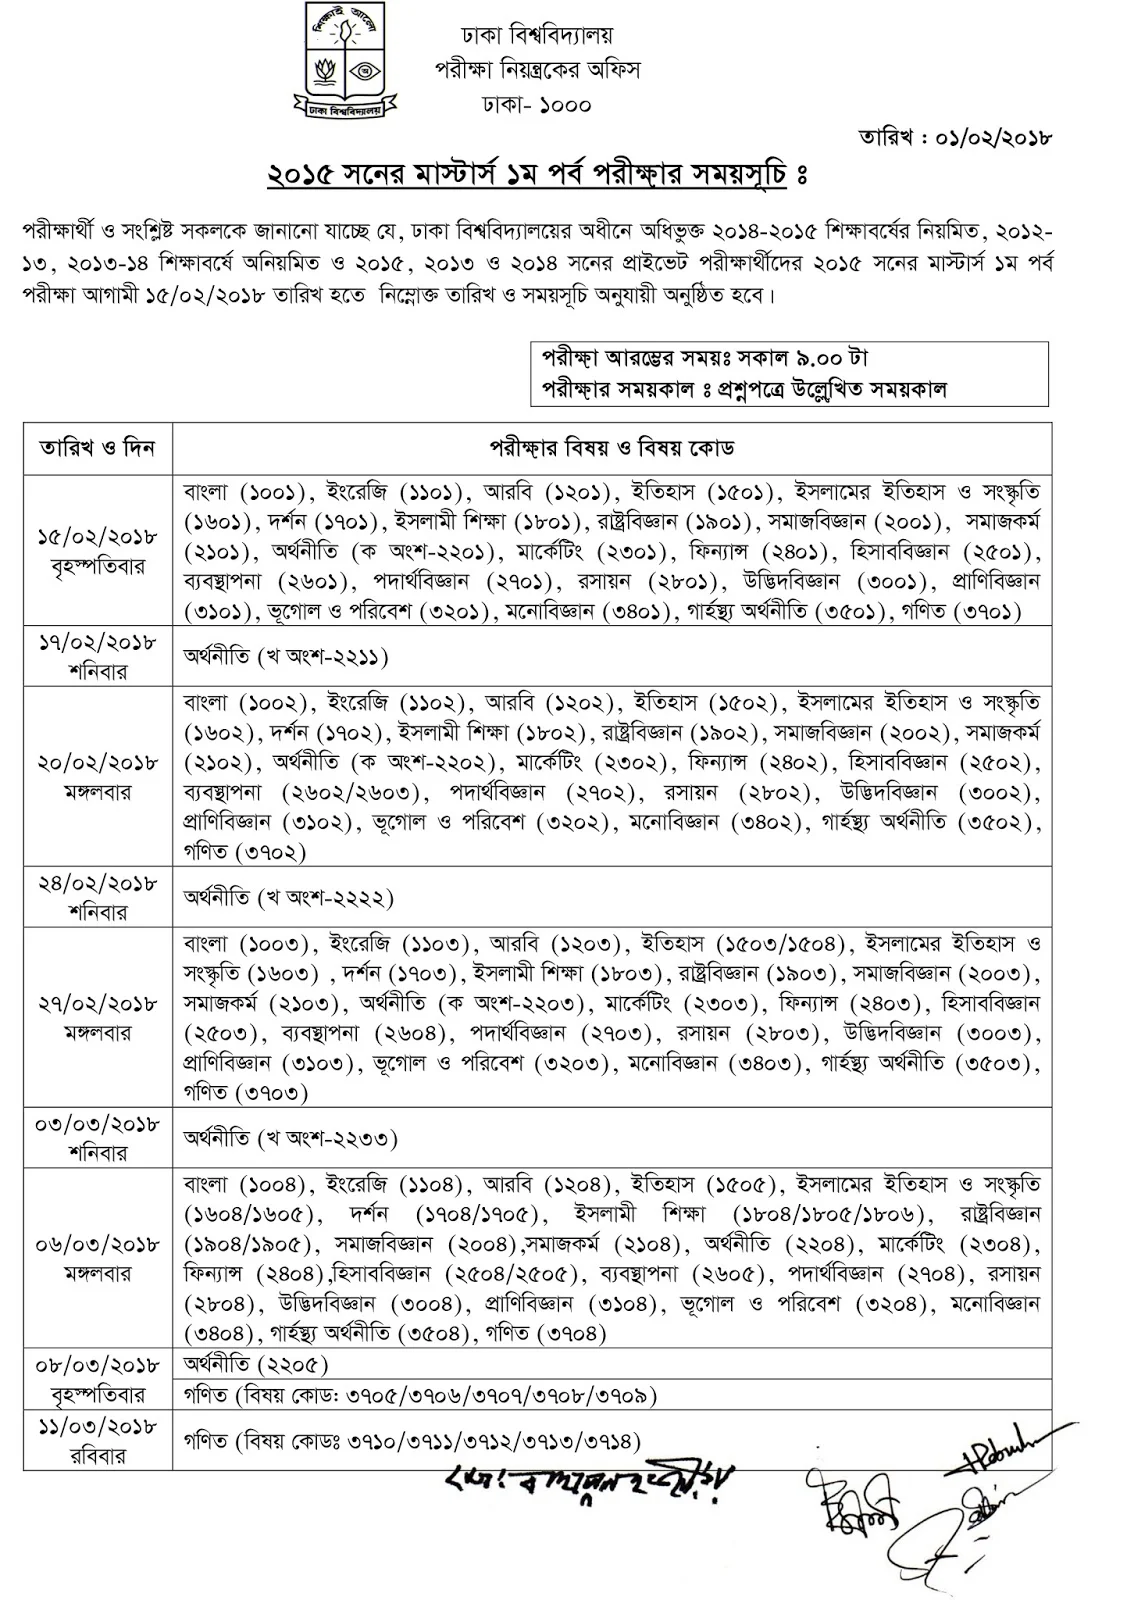 University of Dhaka Under the affiliate 7 college Masters Part-1 Exam Routine